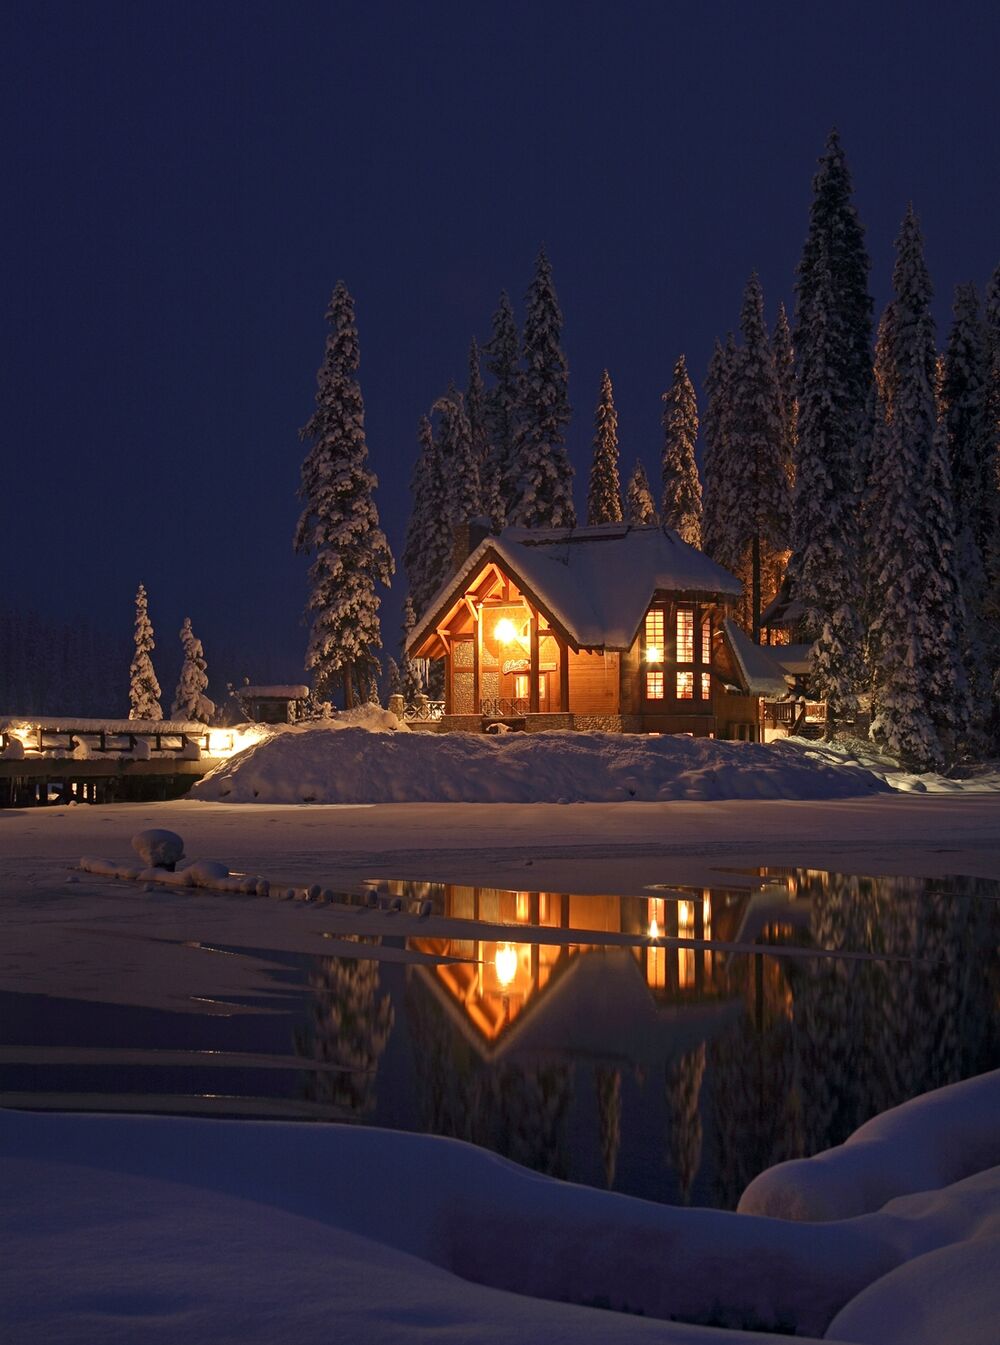 Emerald Lake Lodge at night in the winter in Yoho National Park near Banff National Park.